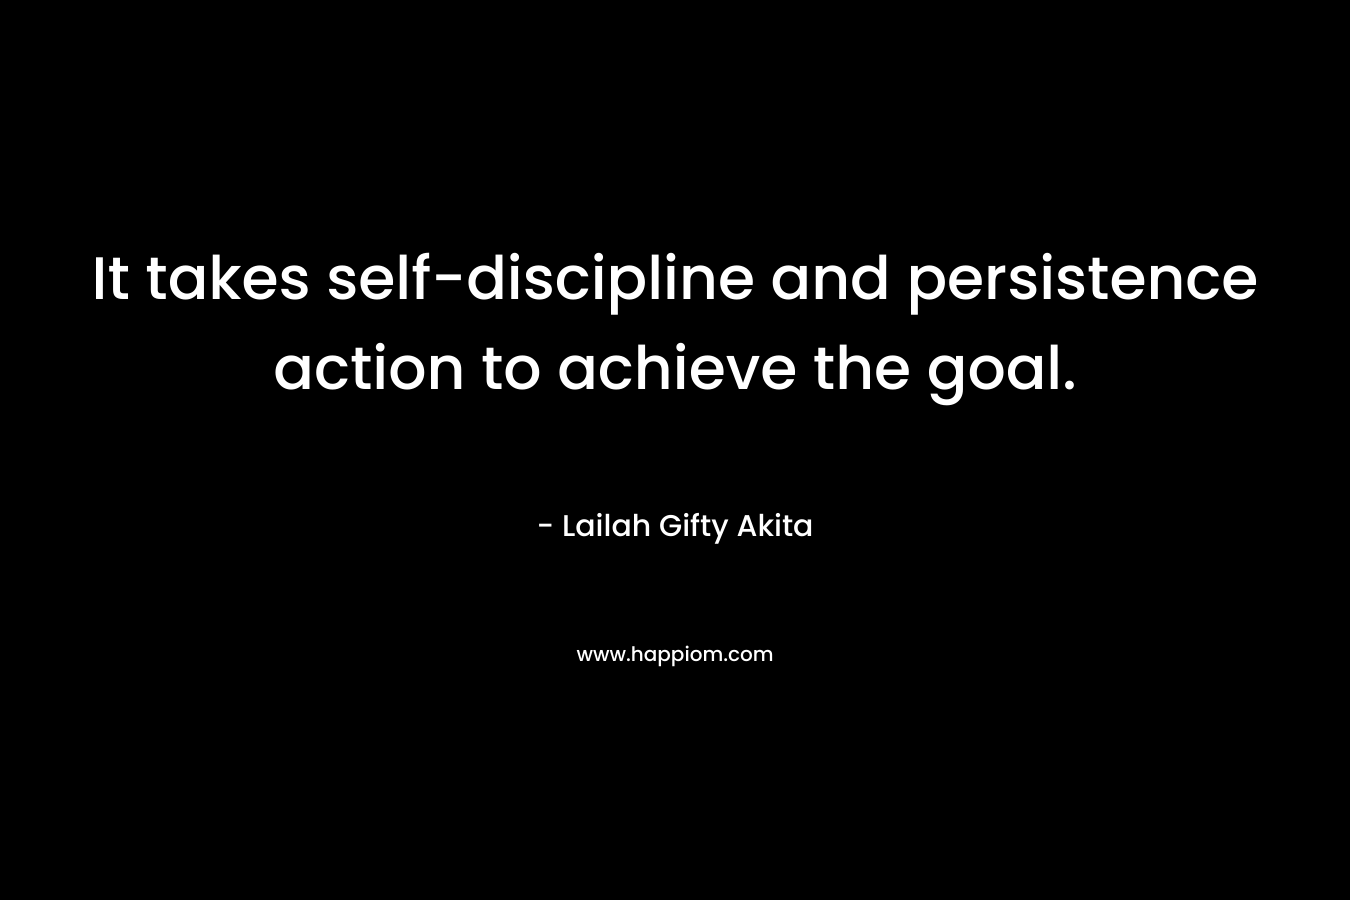 It takes self-discipline and persistence action to achieve the goal.